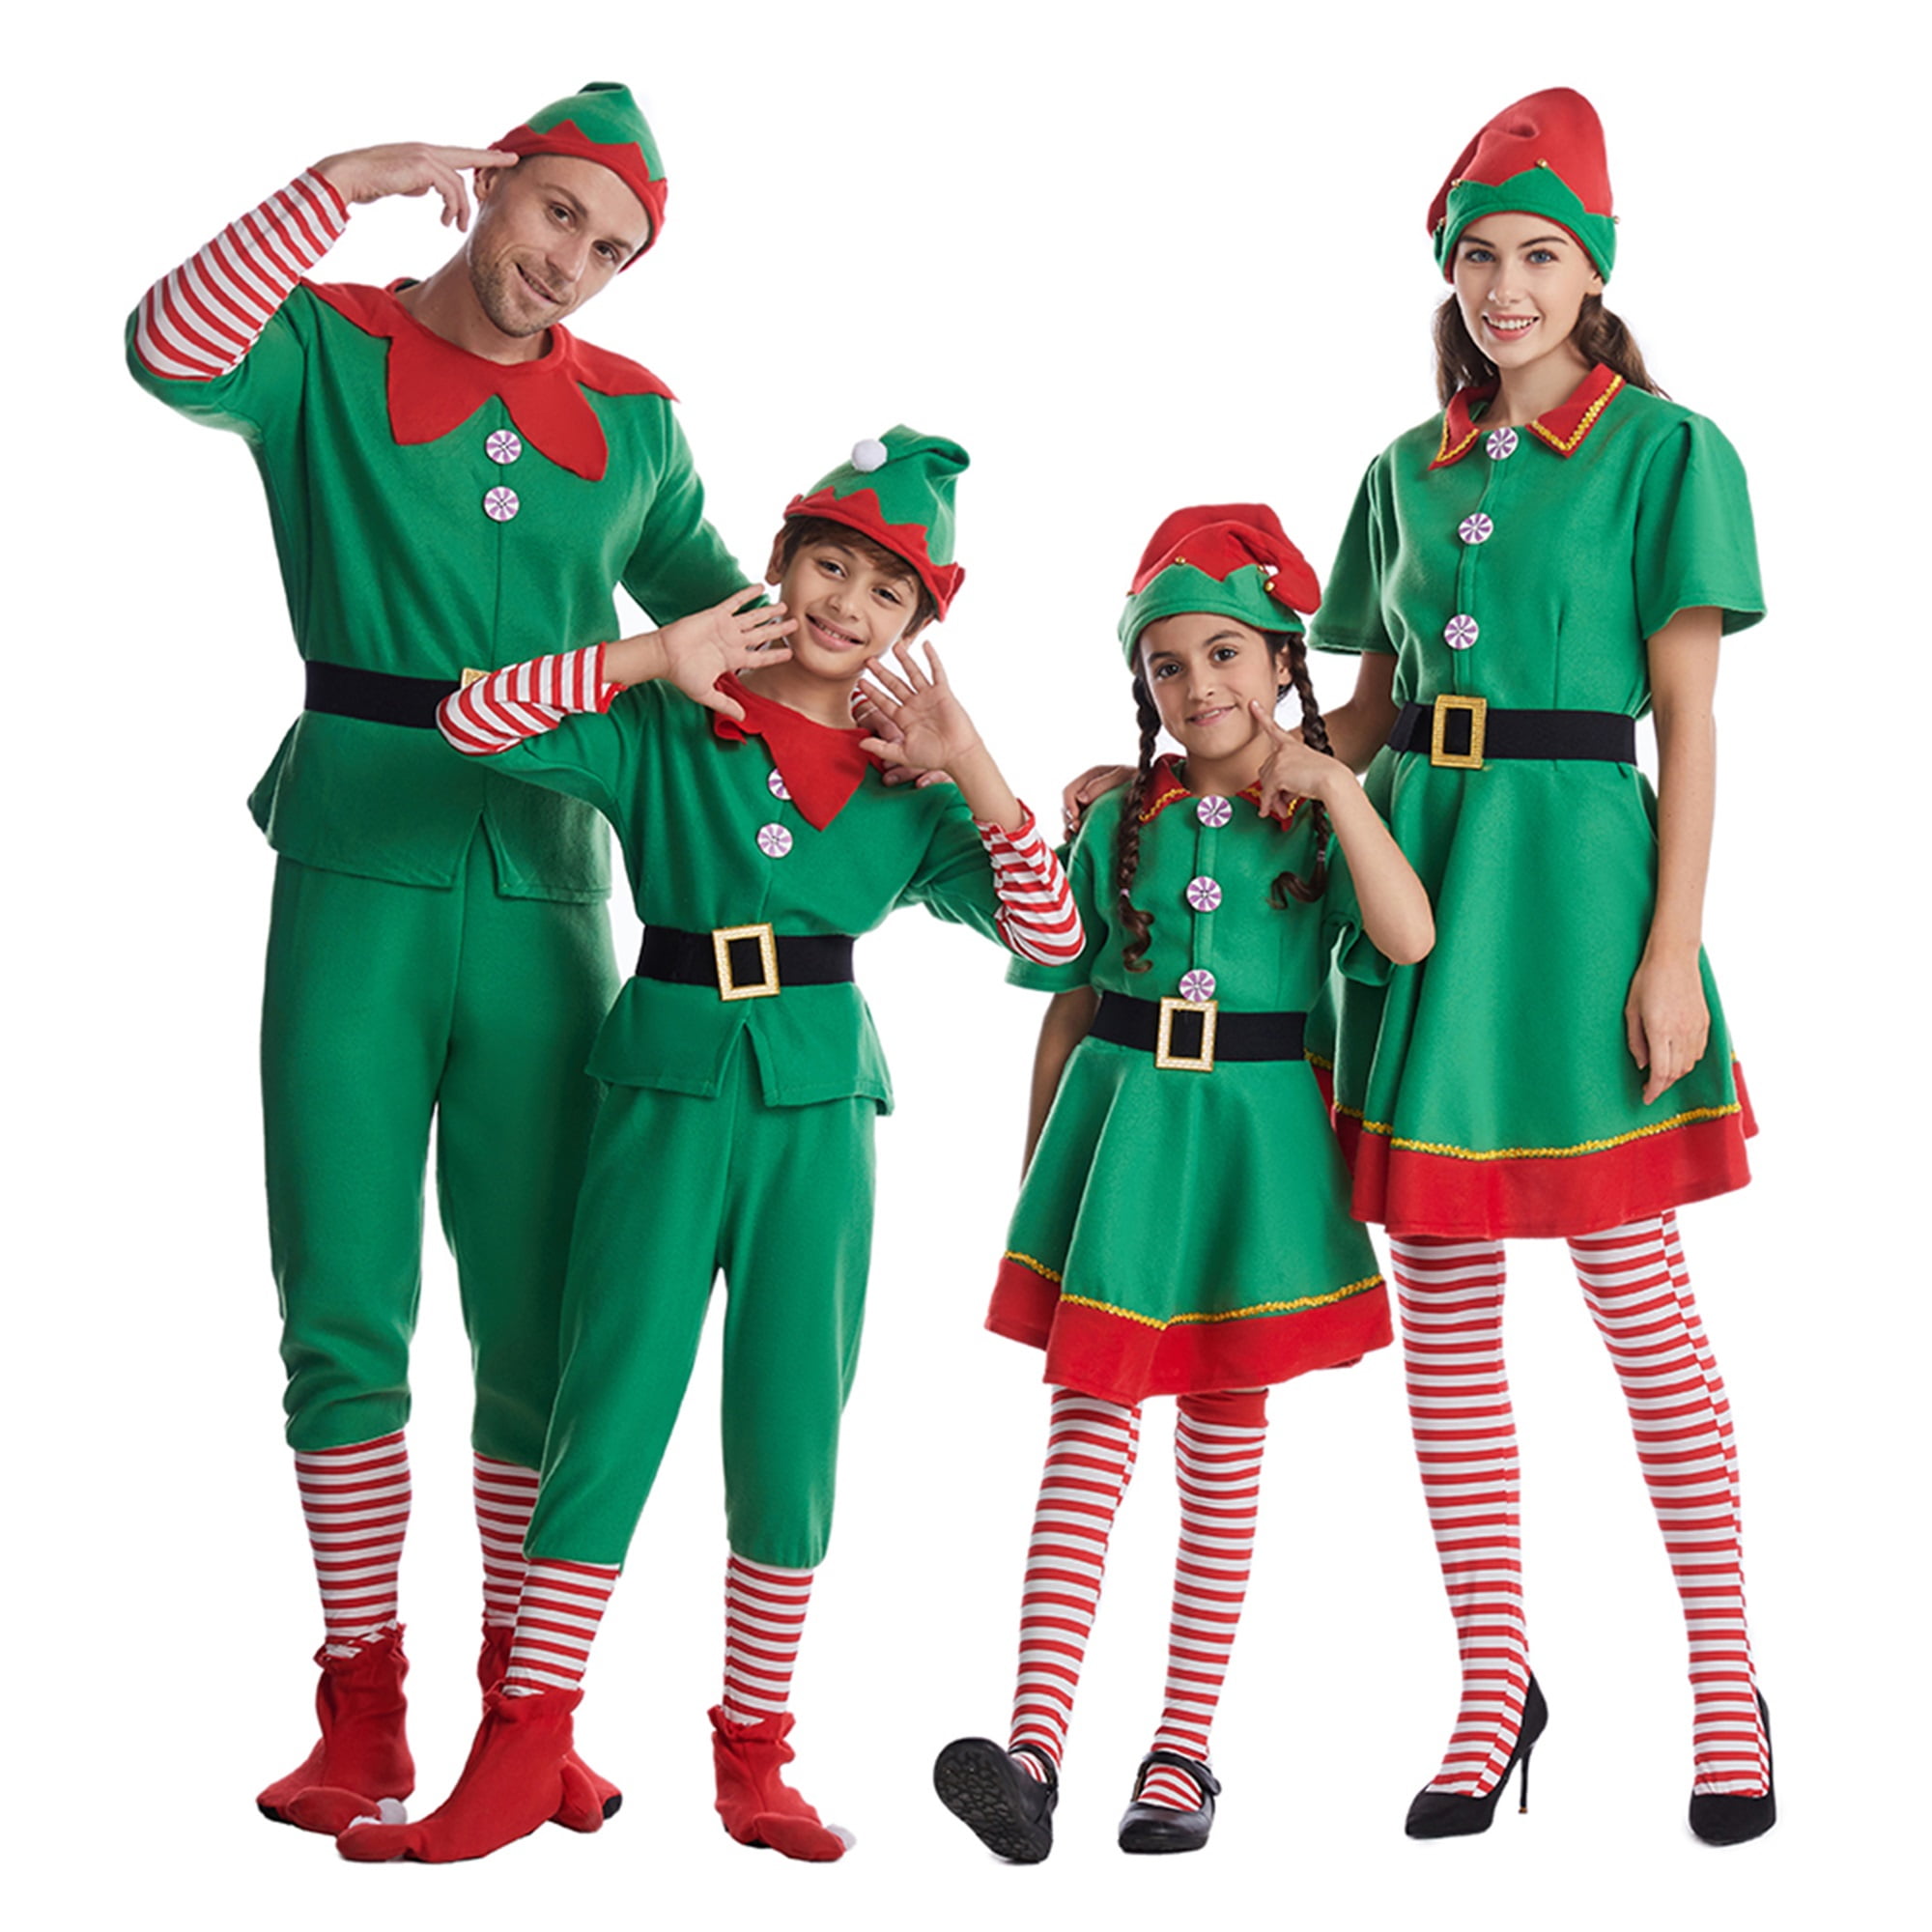 Listenwind Christmas Elf Costume for Family, Green Elf Christmas Costumes  Whole Set Holiday Party Xmas Outfit for Adults Kids 